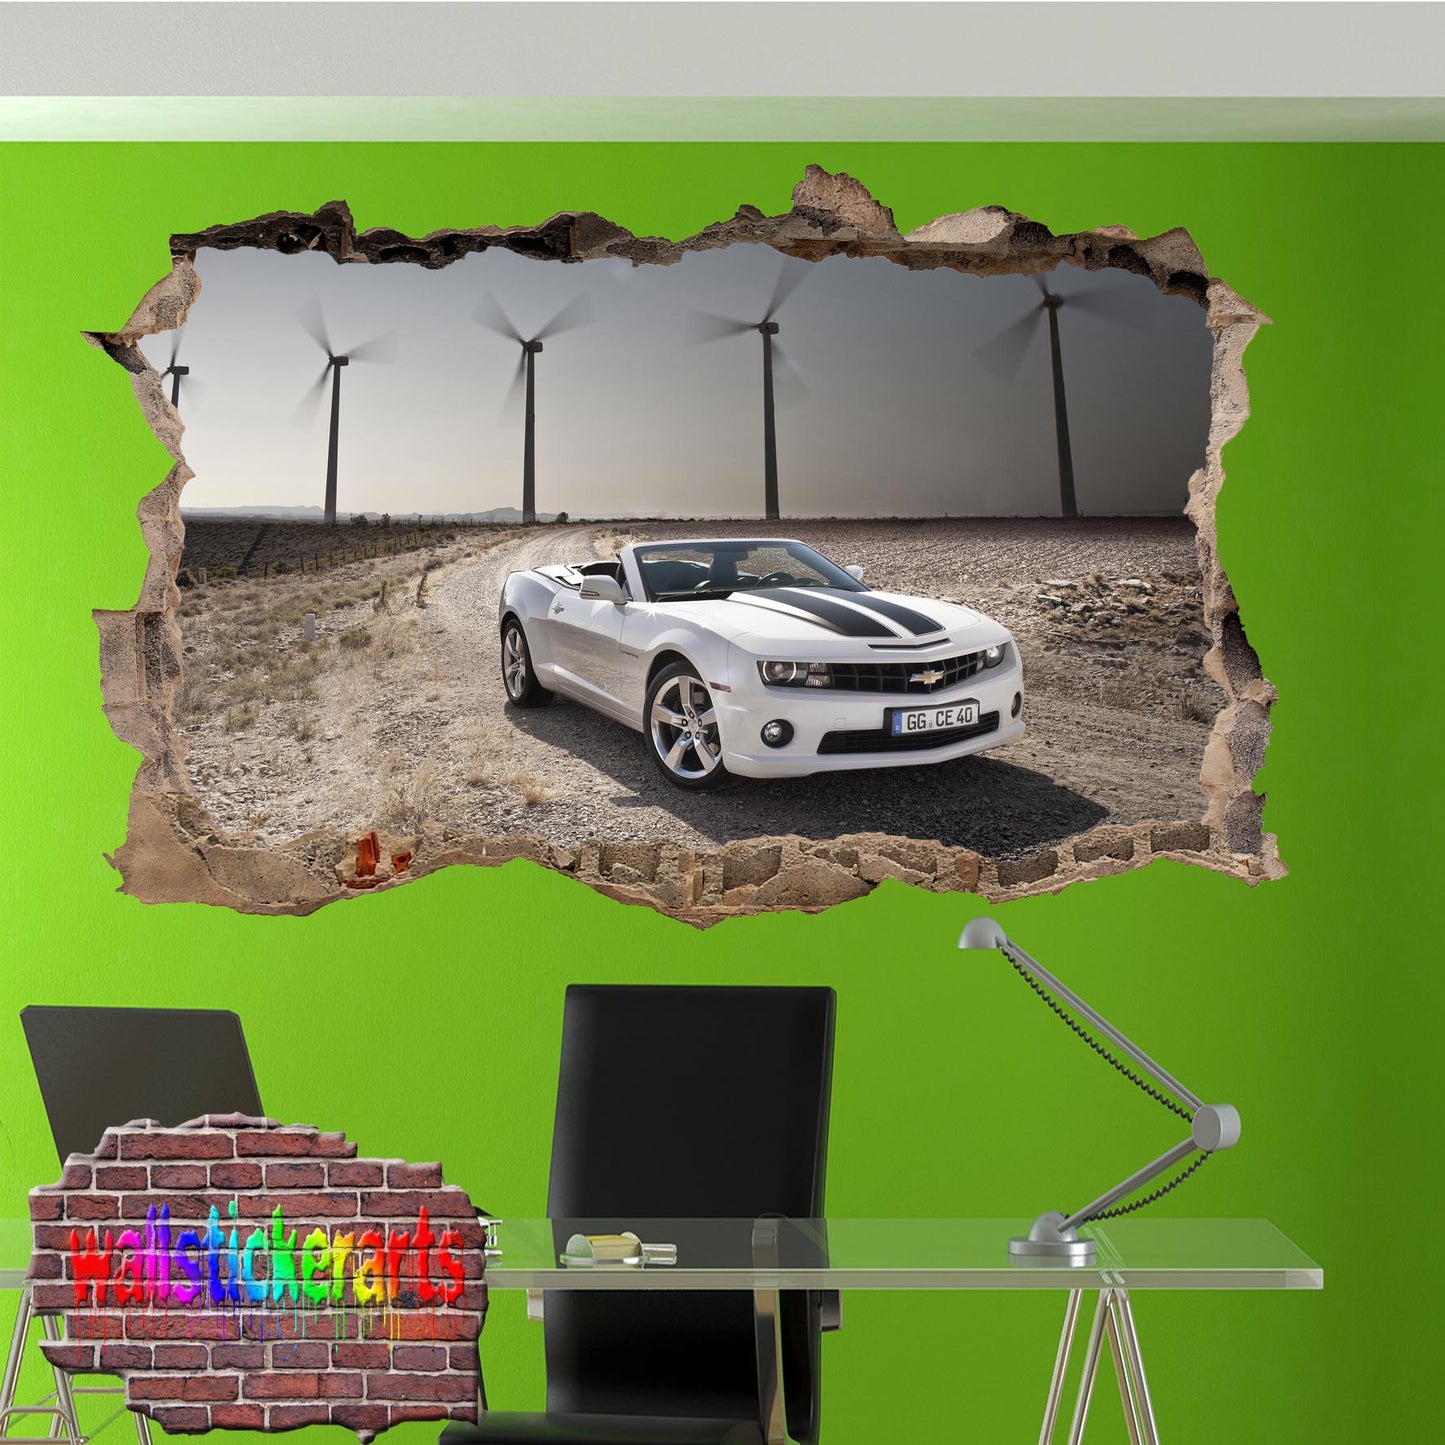 Chevrolet Camaro Wall Sticker poster mural decal